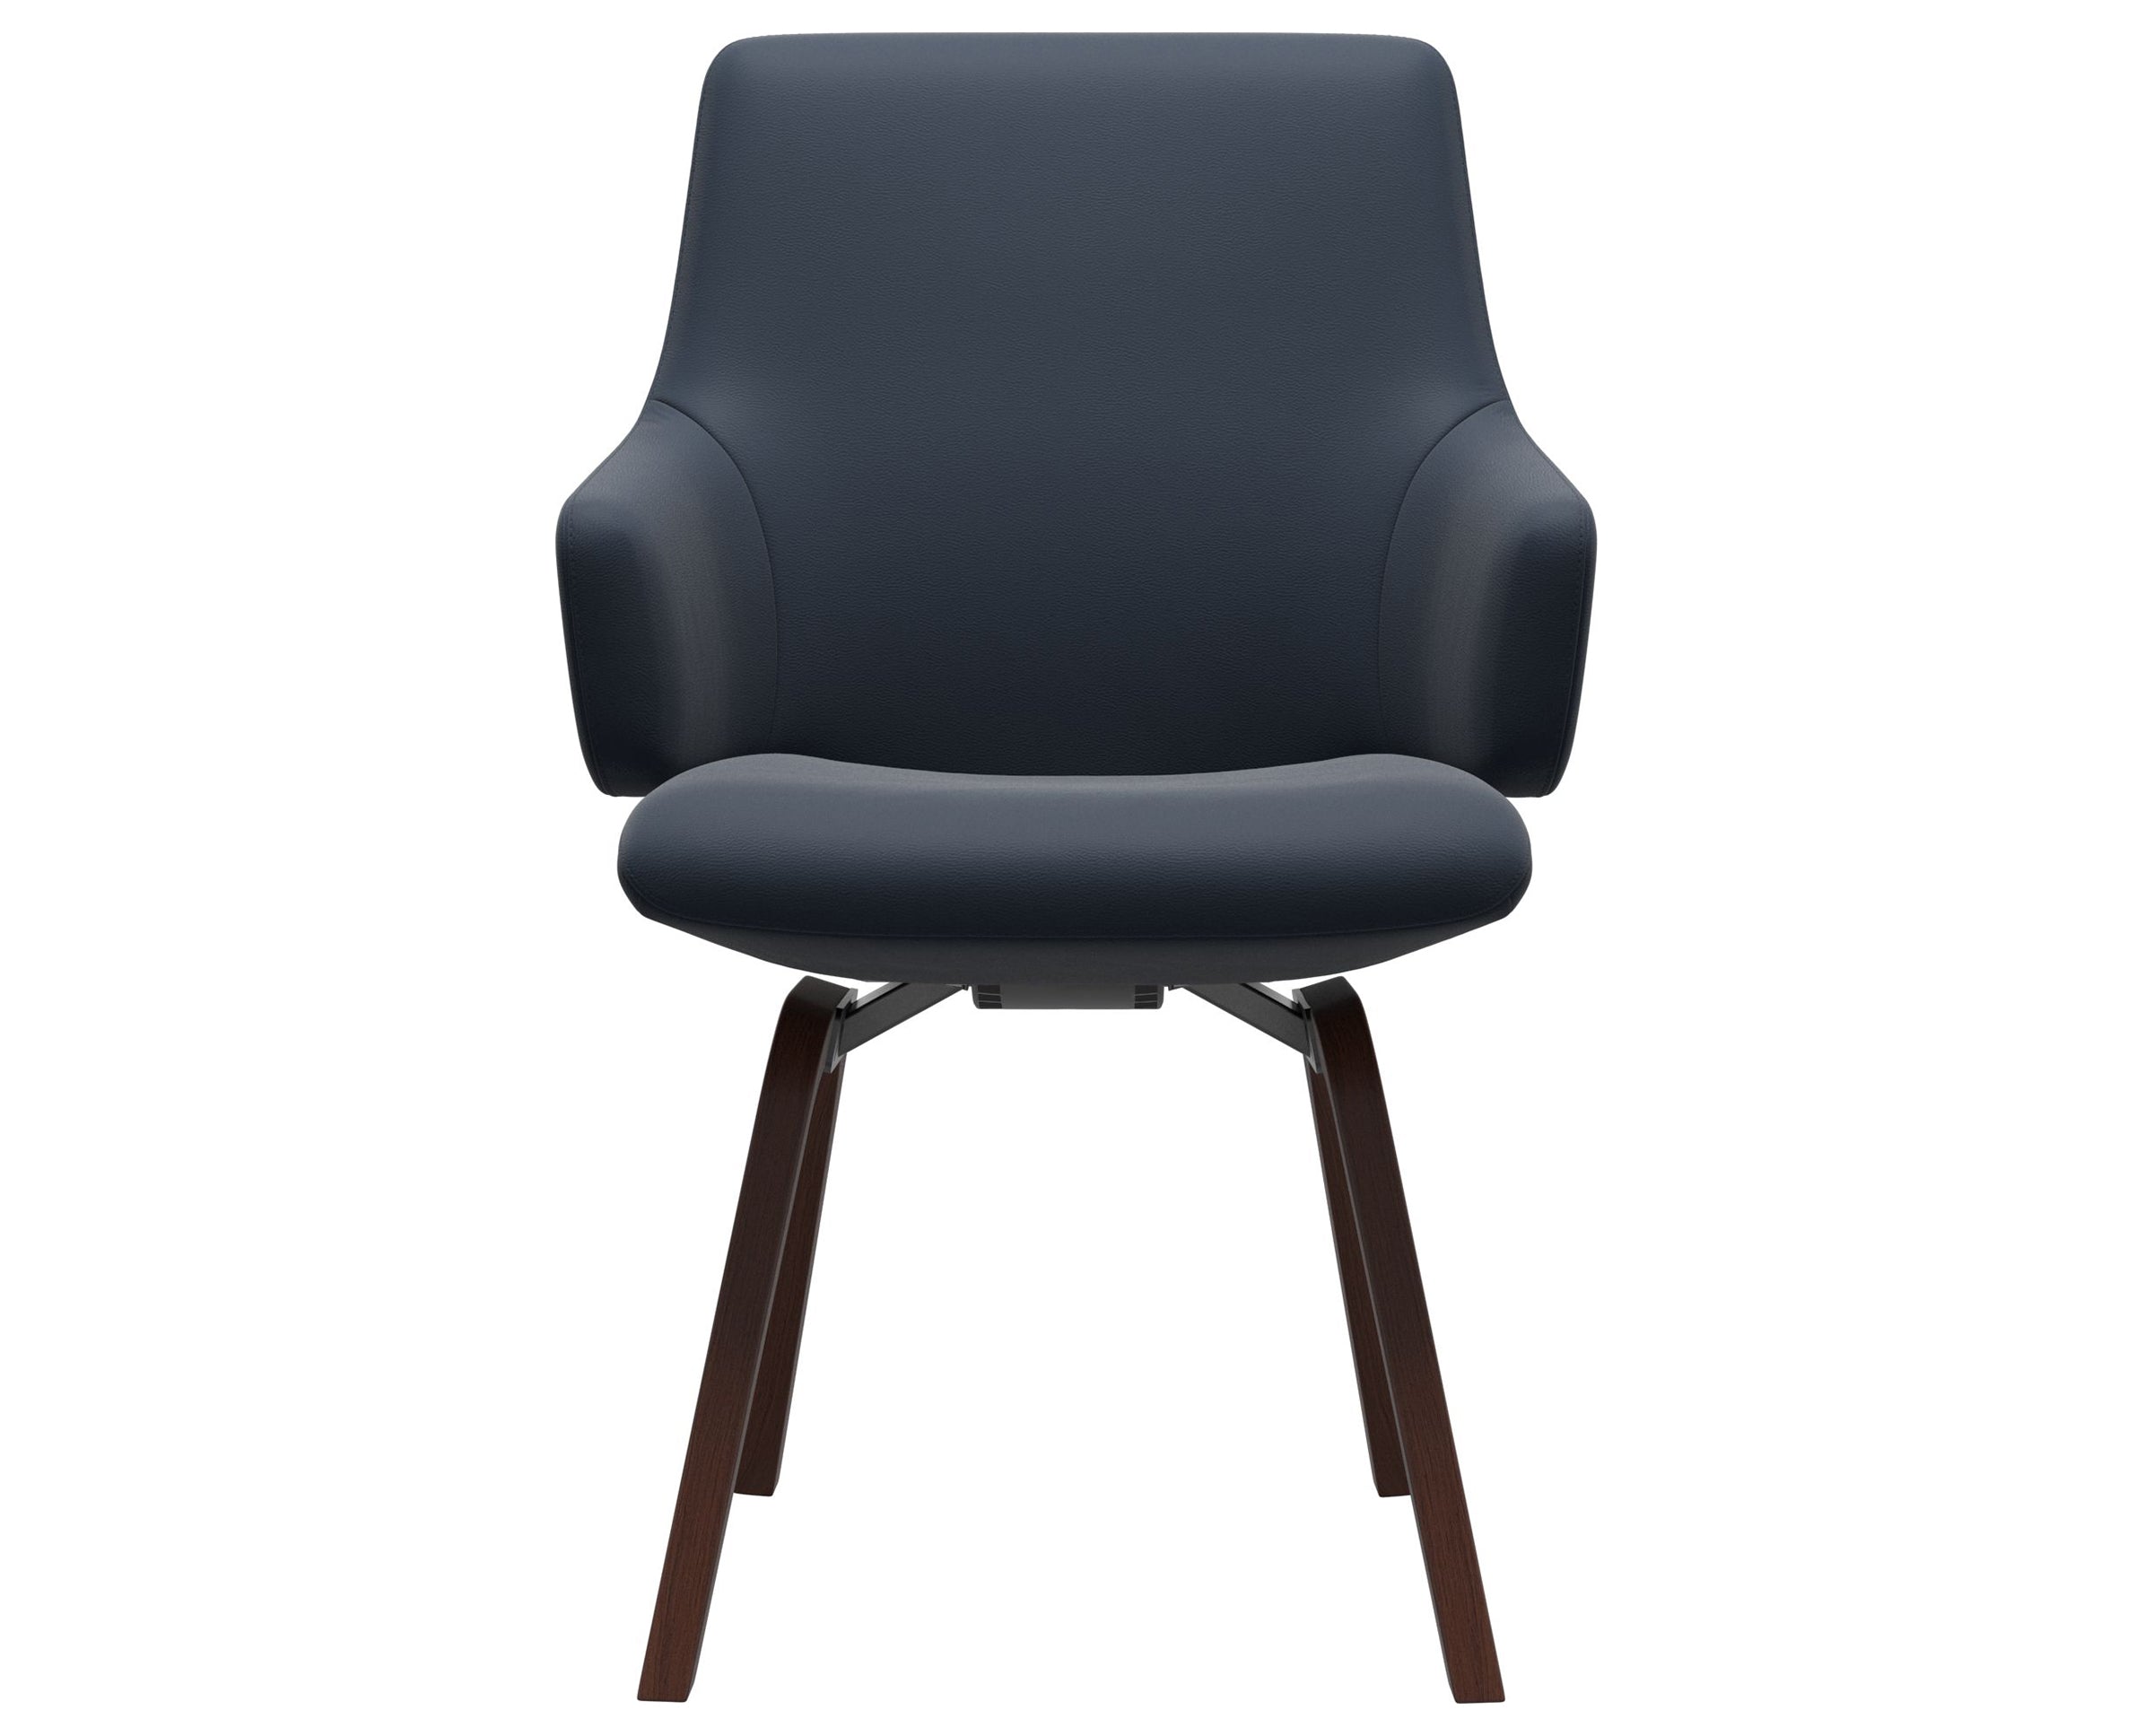 Paloma Leather Oxford Blue and Walnut Base | Stressless Laurel Low Back D200 Dining Chair w/Arms | Valley Ridge Furniture